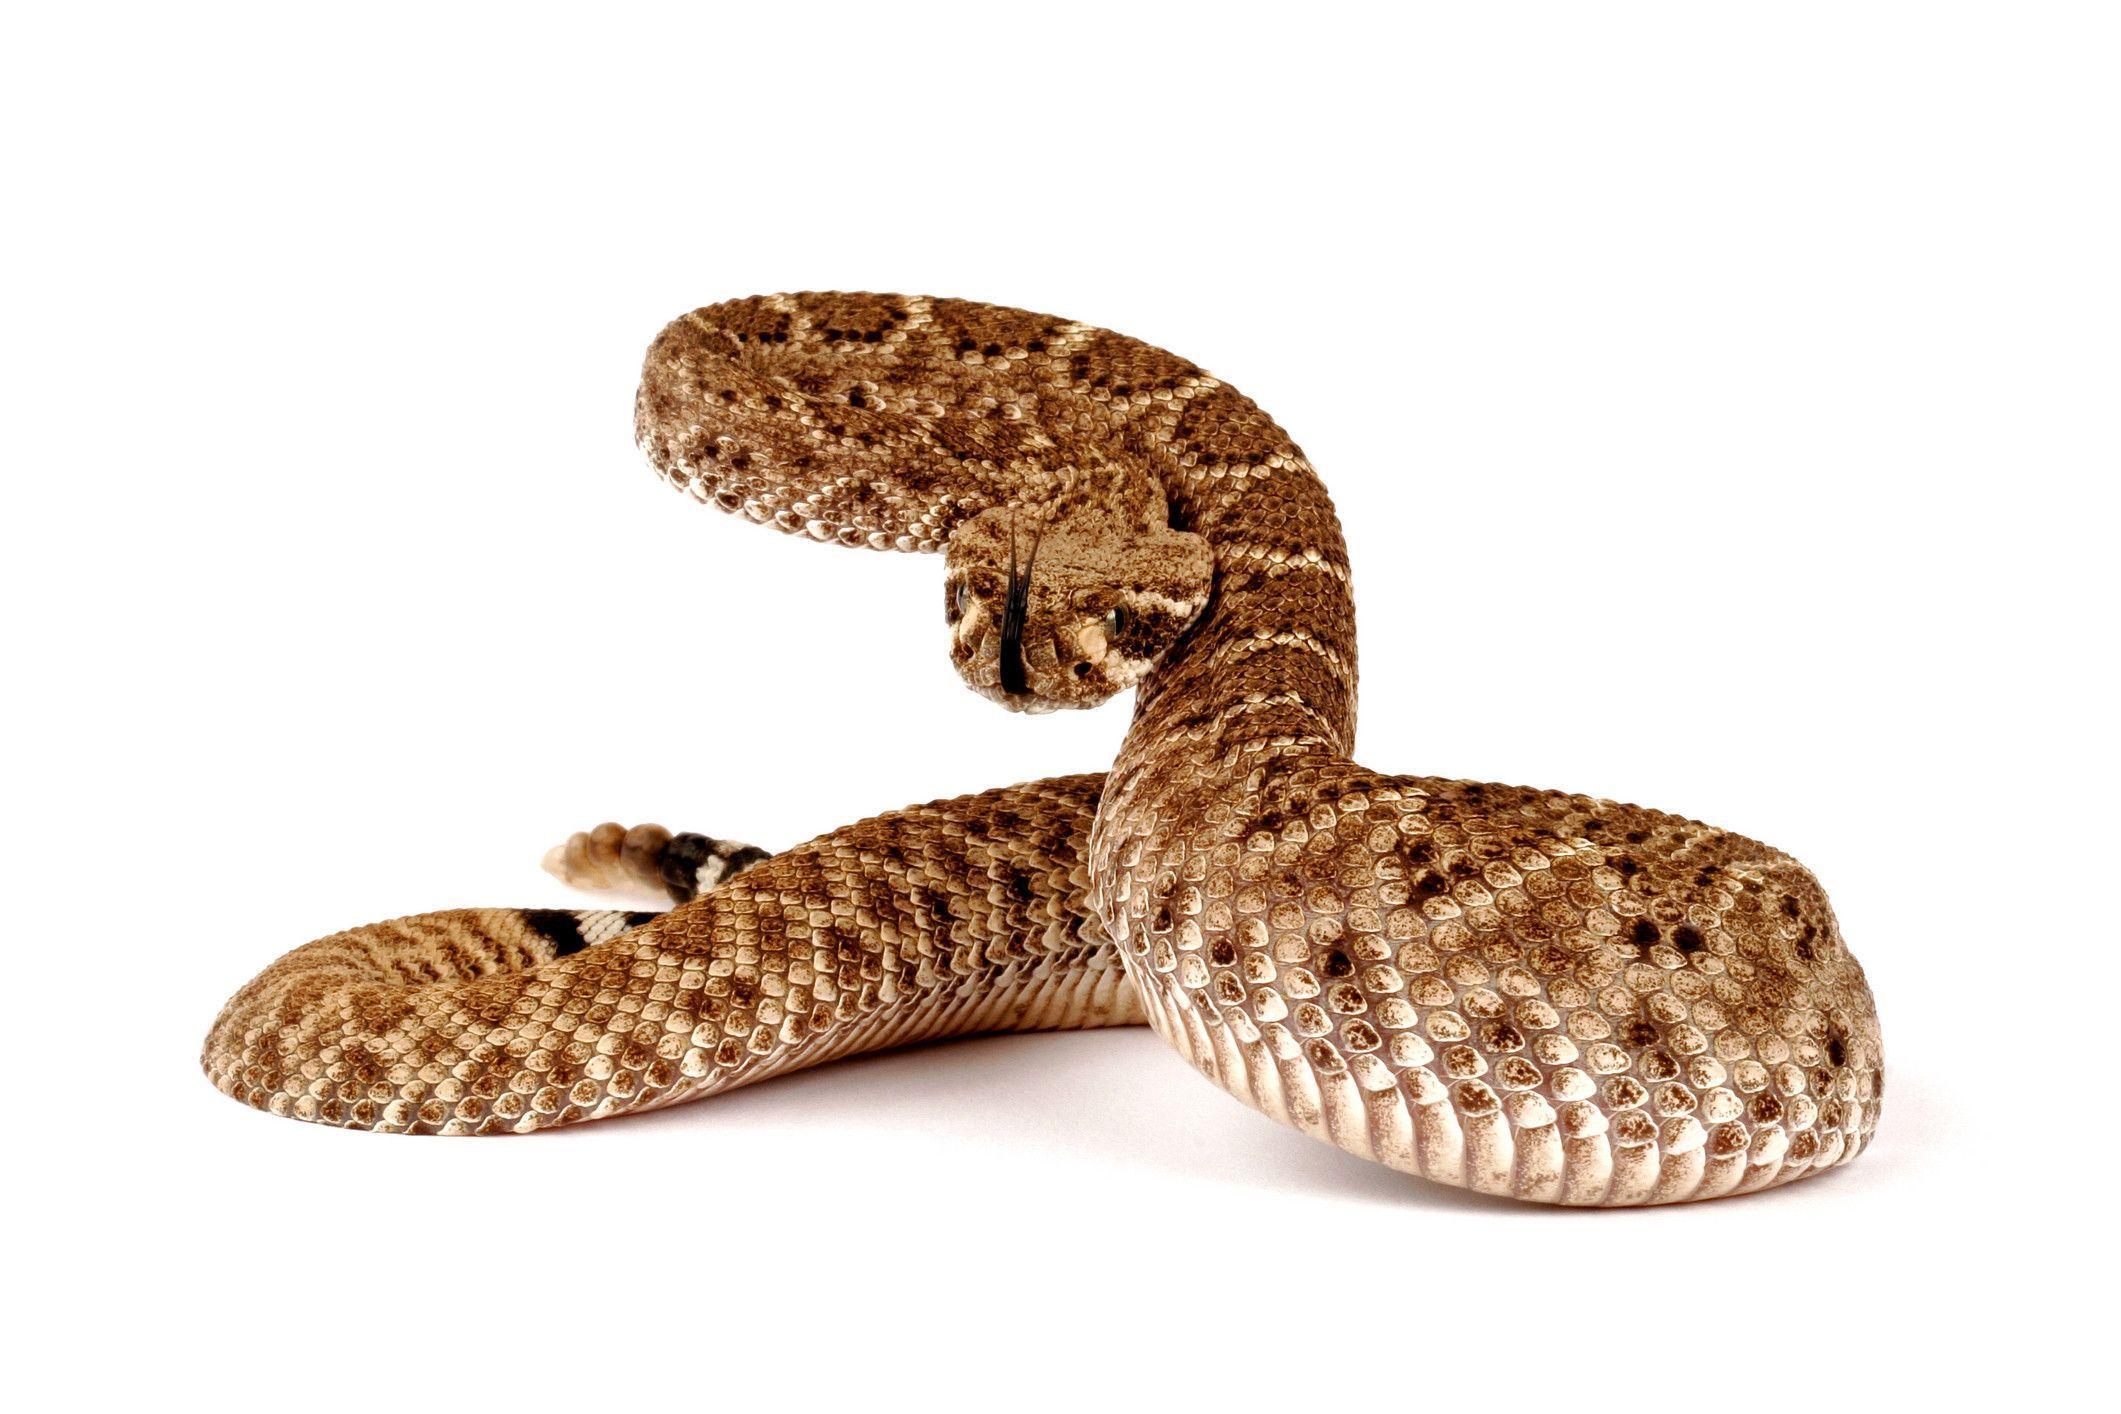 Download An upclose photo of a beautifully marked rattlesnake  Wallpapers com